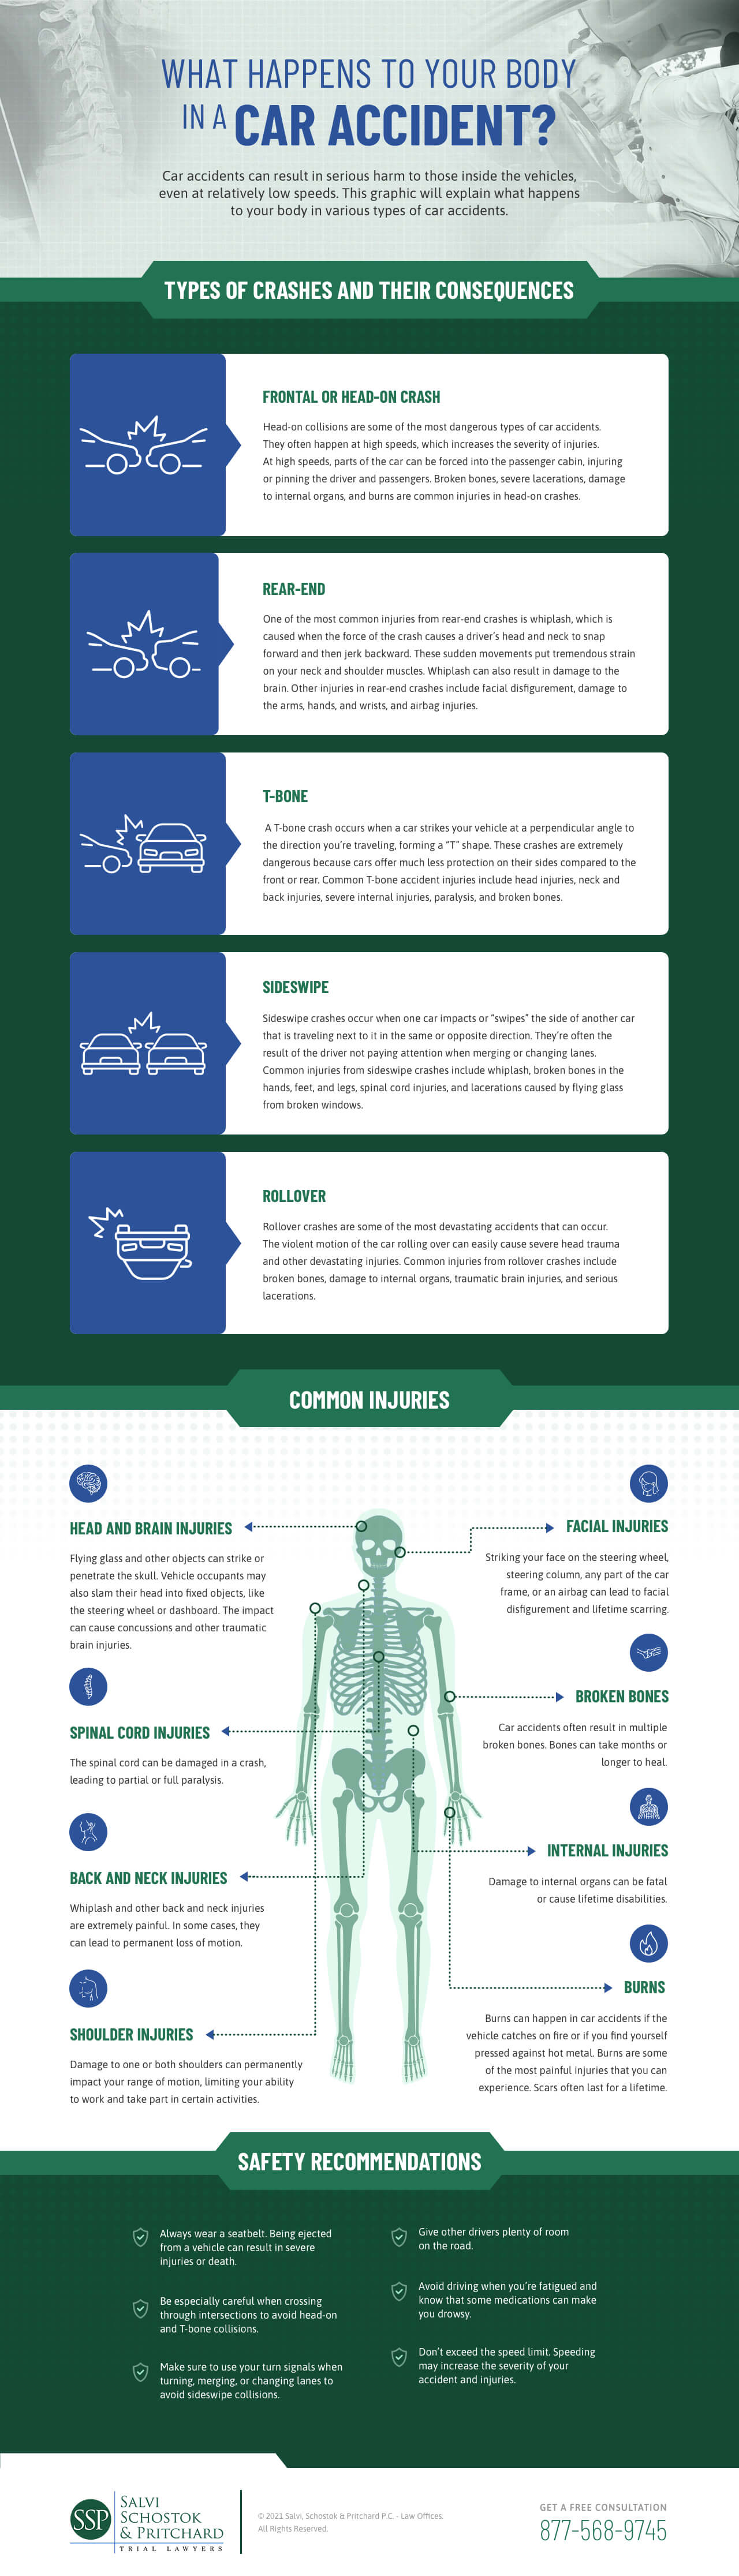 What Happens To Your Body In A Car Accident?